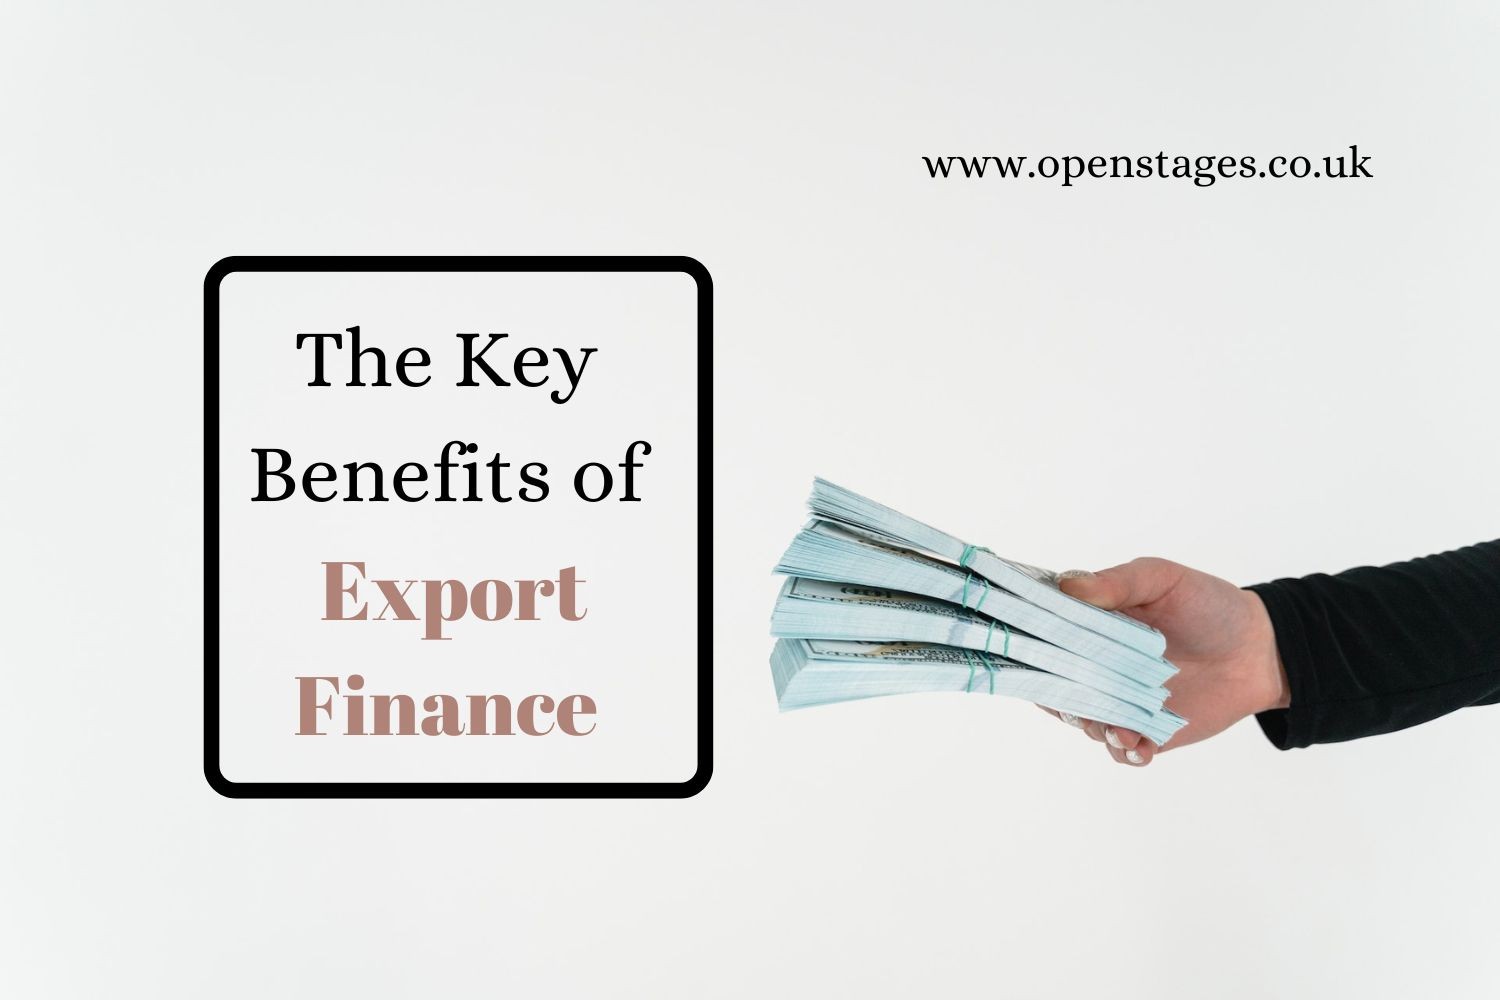 What are the 5 Key Benefits of Export Finance?